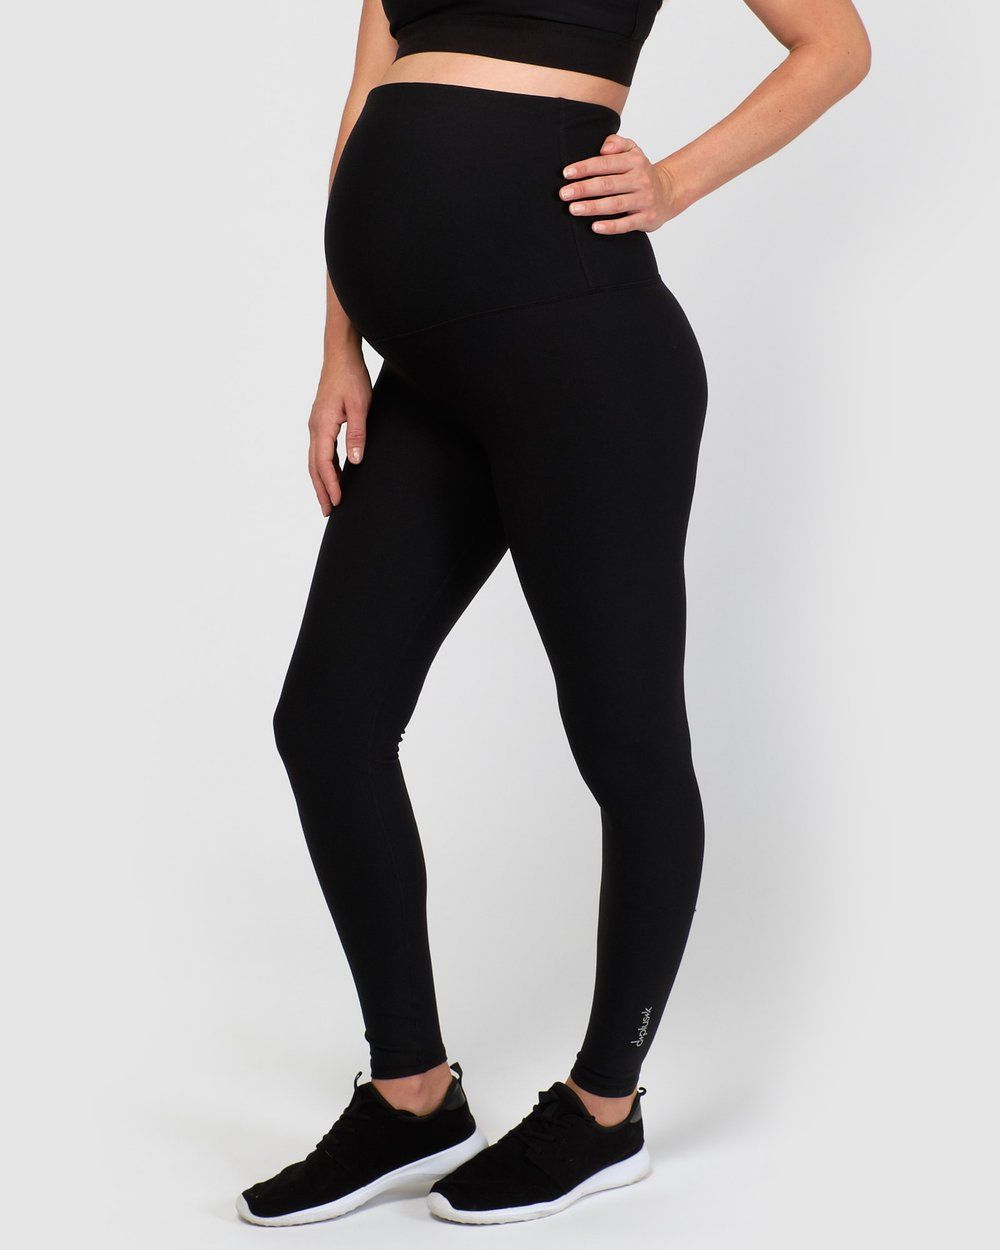 Lotus Maternity Full Length Tights | THE ICONIC (AU & NZ)